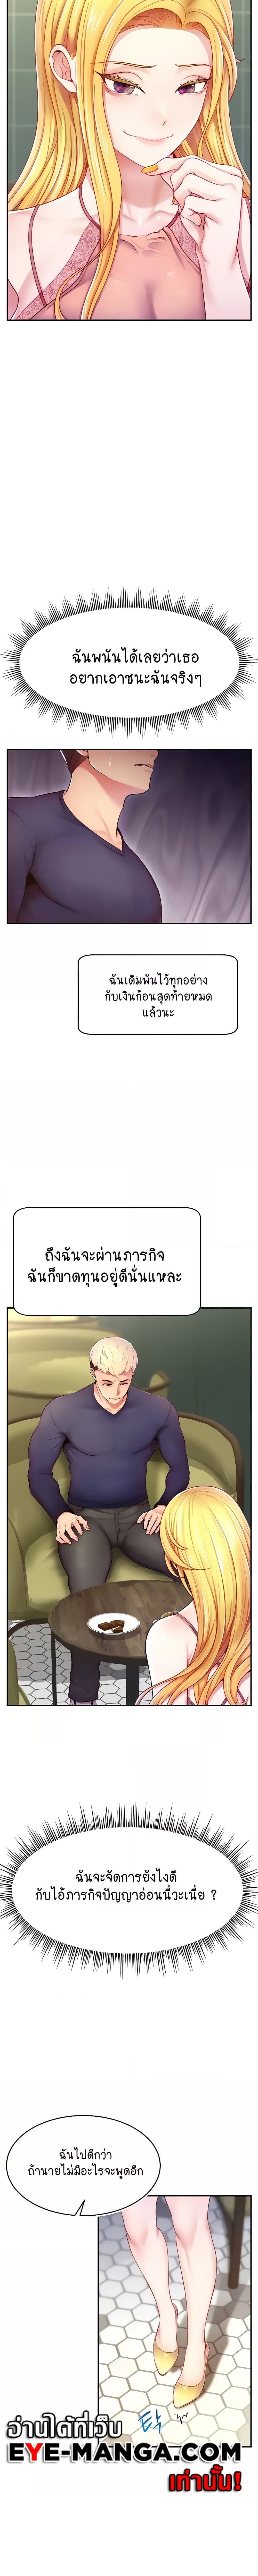 Making Friends With Streamers by Hacking! ตอนที่ 4 ภาพ 10